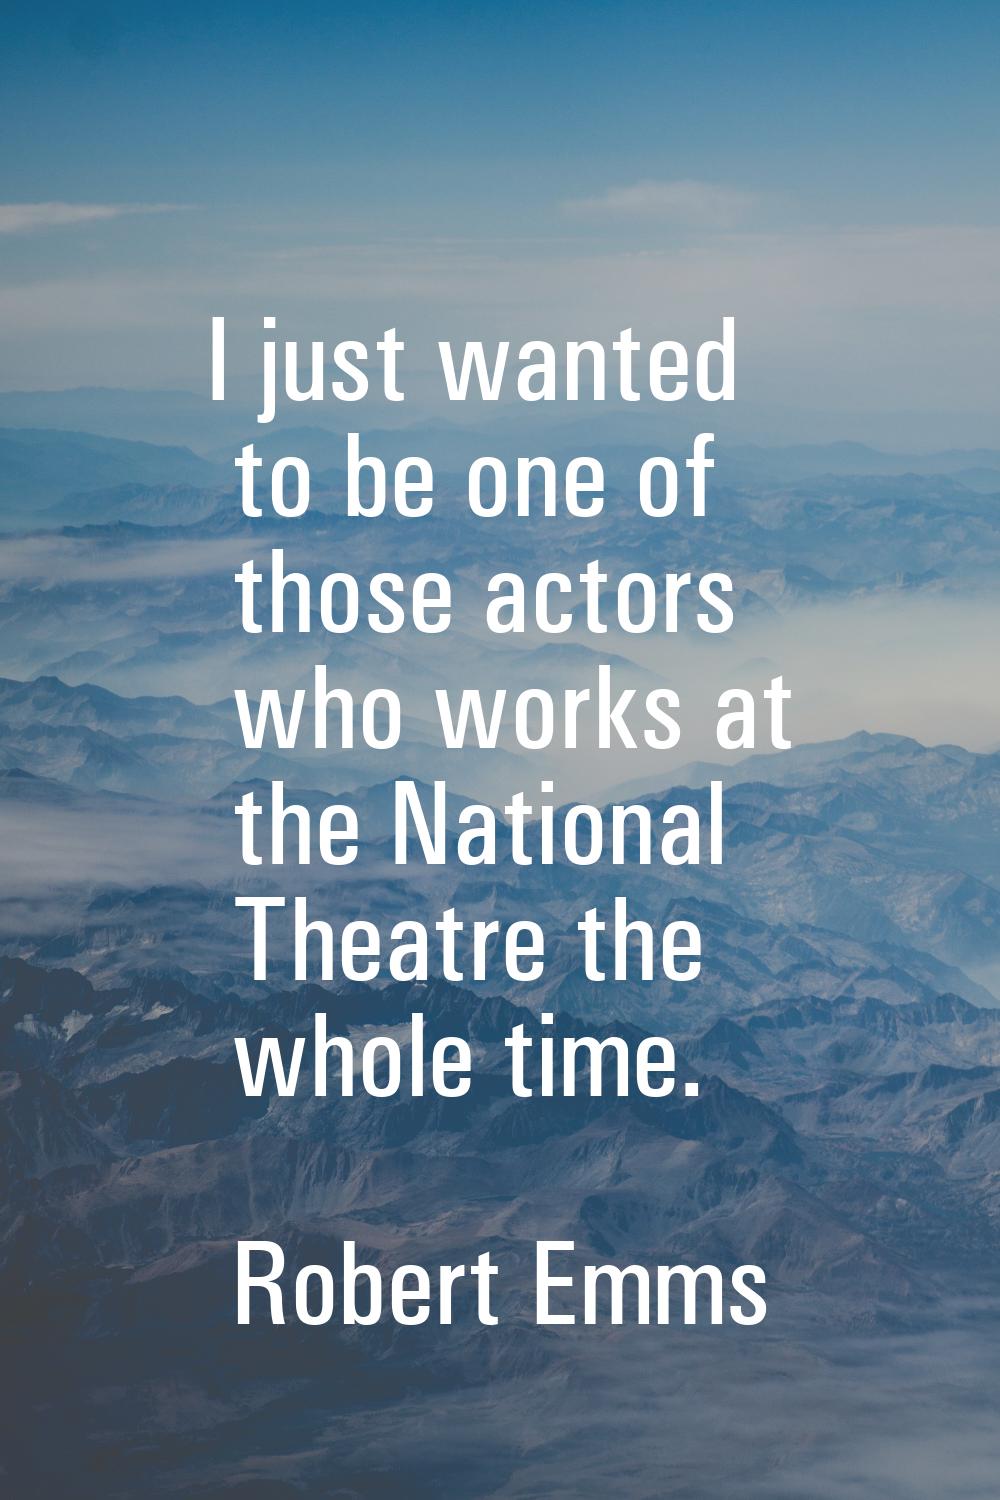 I just wanted to be one of those actors who works at the National Theatre the whole time.